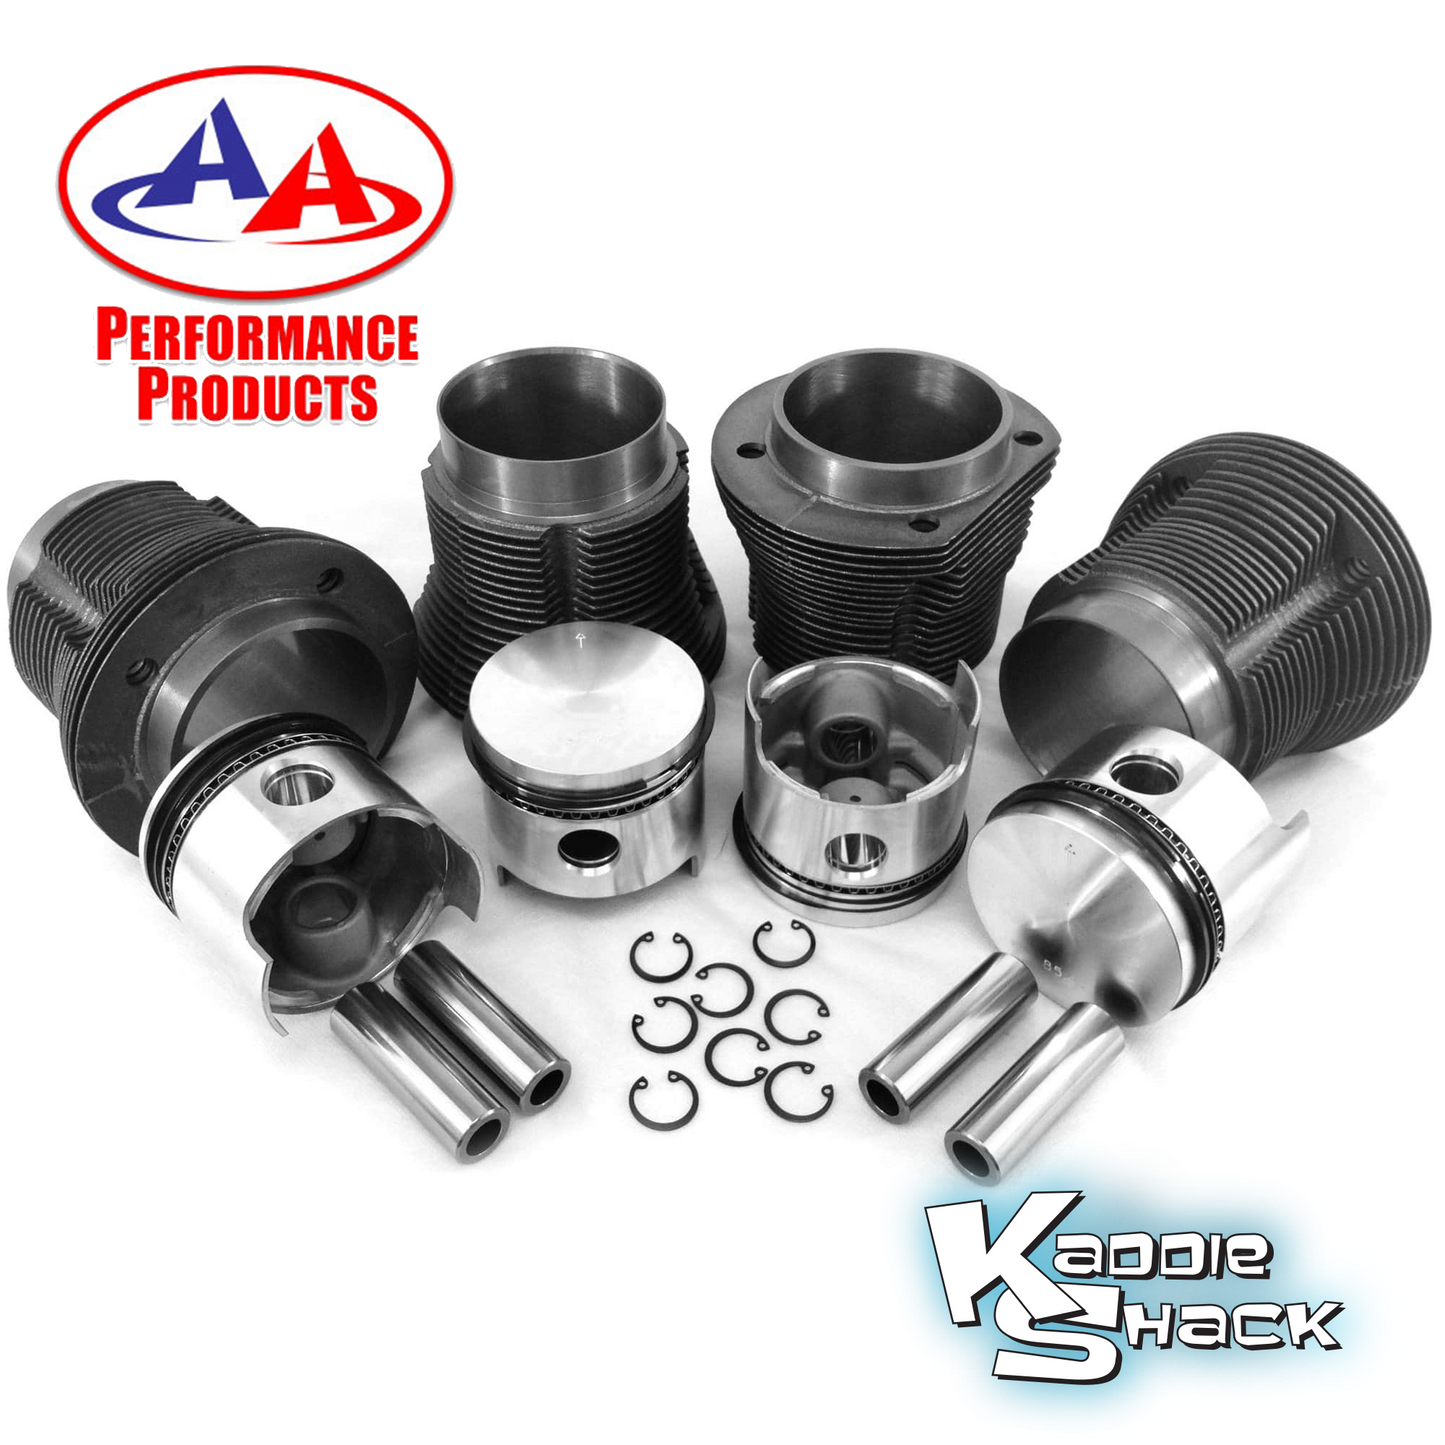 90.5mm X 69mm Performance Pistons and Cylinders